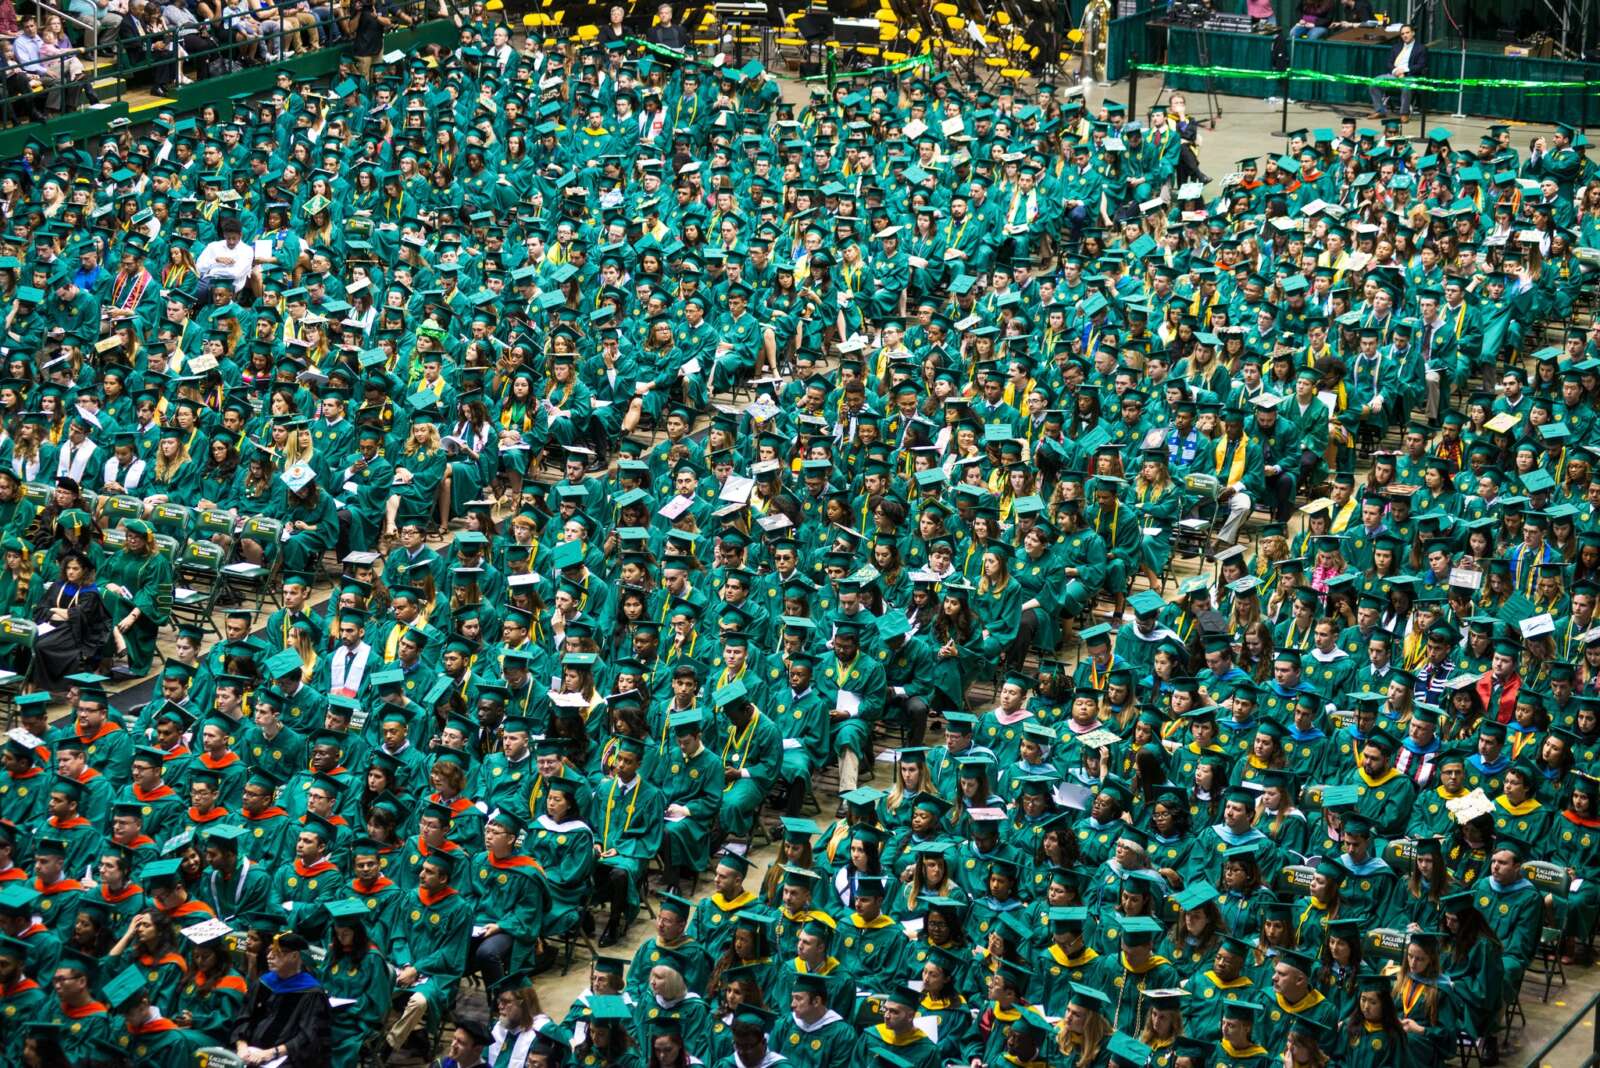 GMU announces enhanced security measures for spring commencement